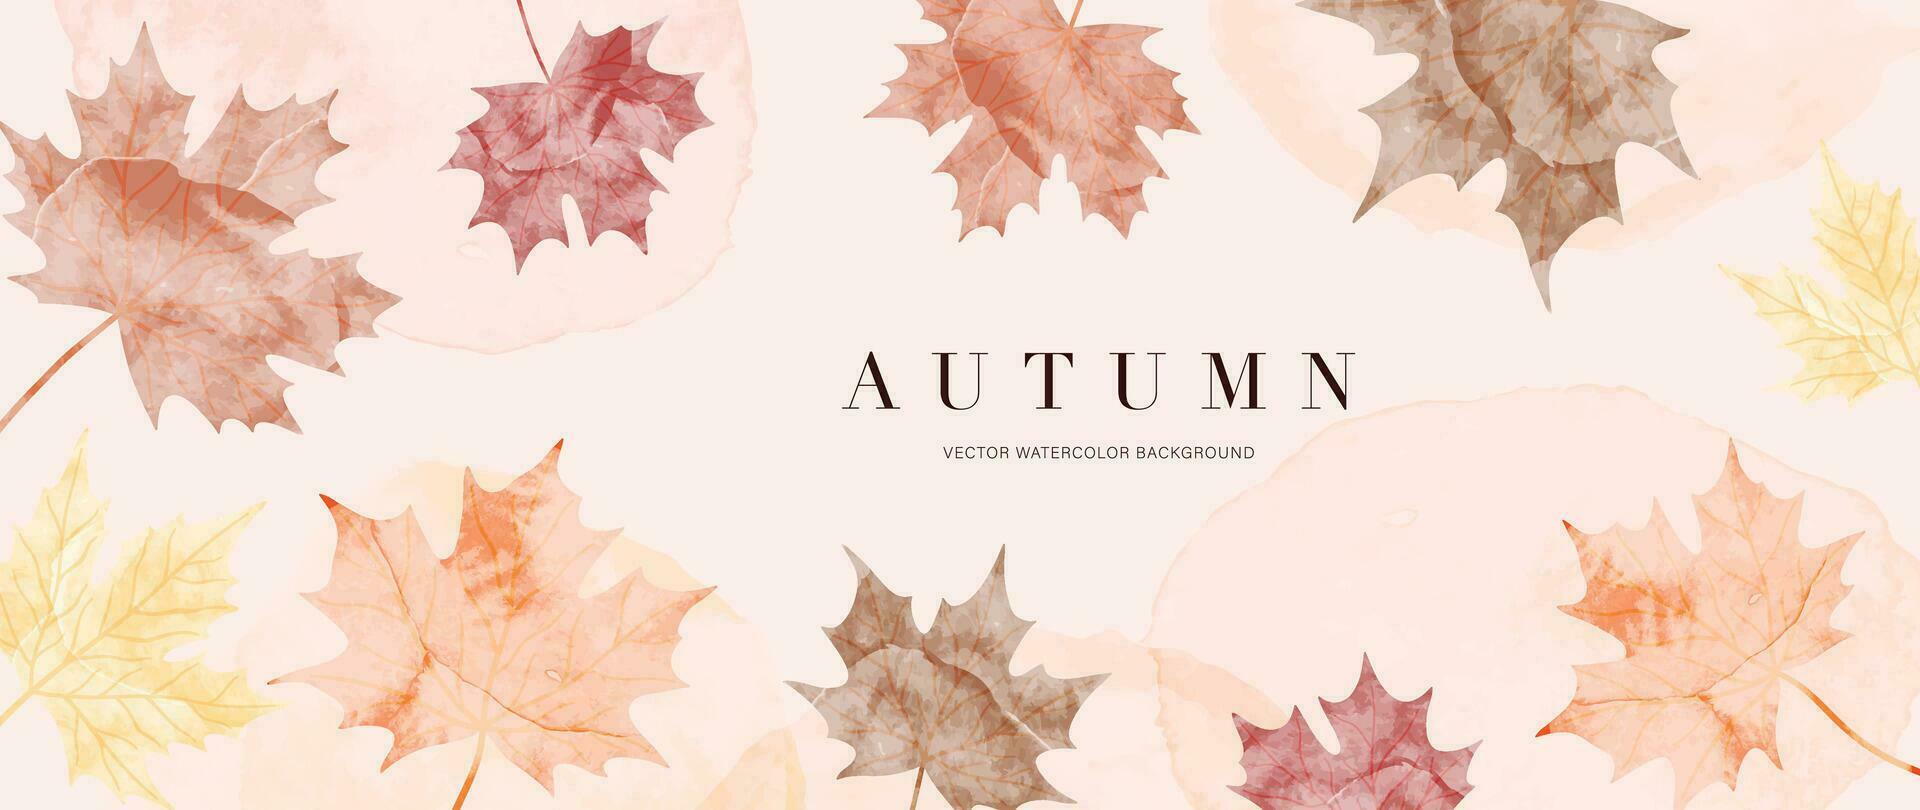 Autumn foliage in watercolor vector background. Abstract wallpaper design with maple leaves, line art. Elegant botanical in fall season illustration suitable for fabric, prints, cover.